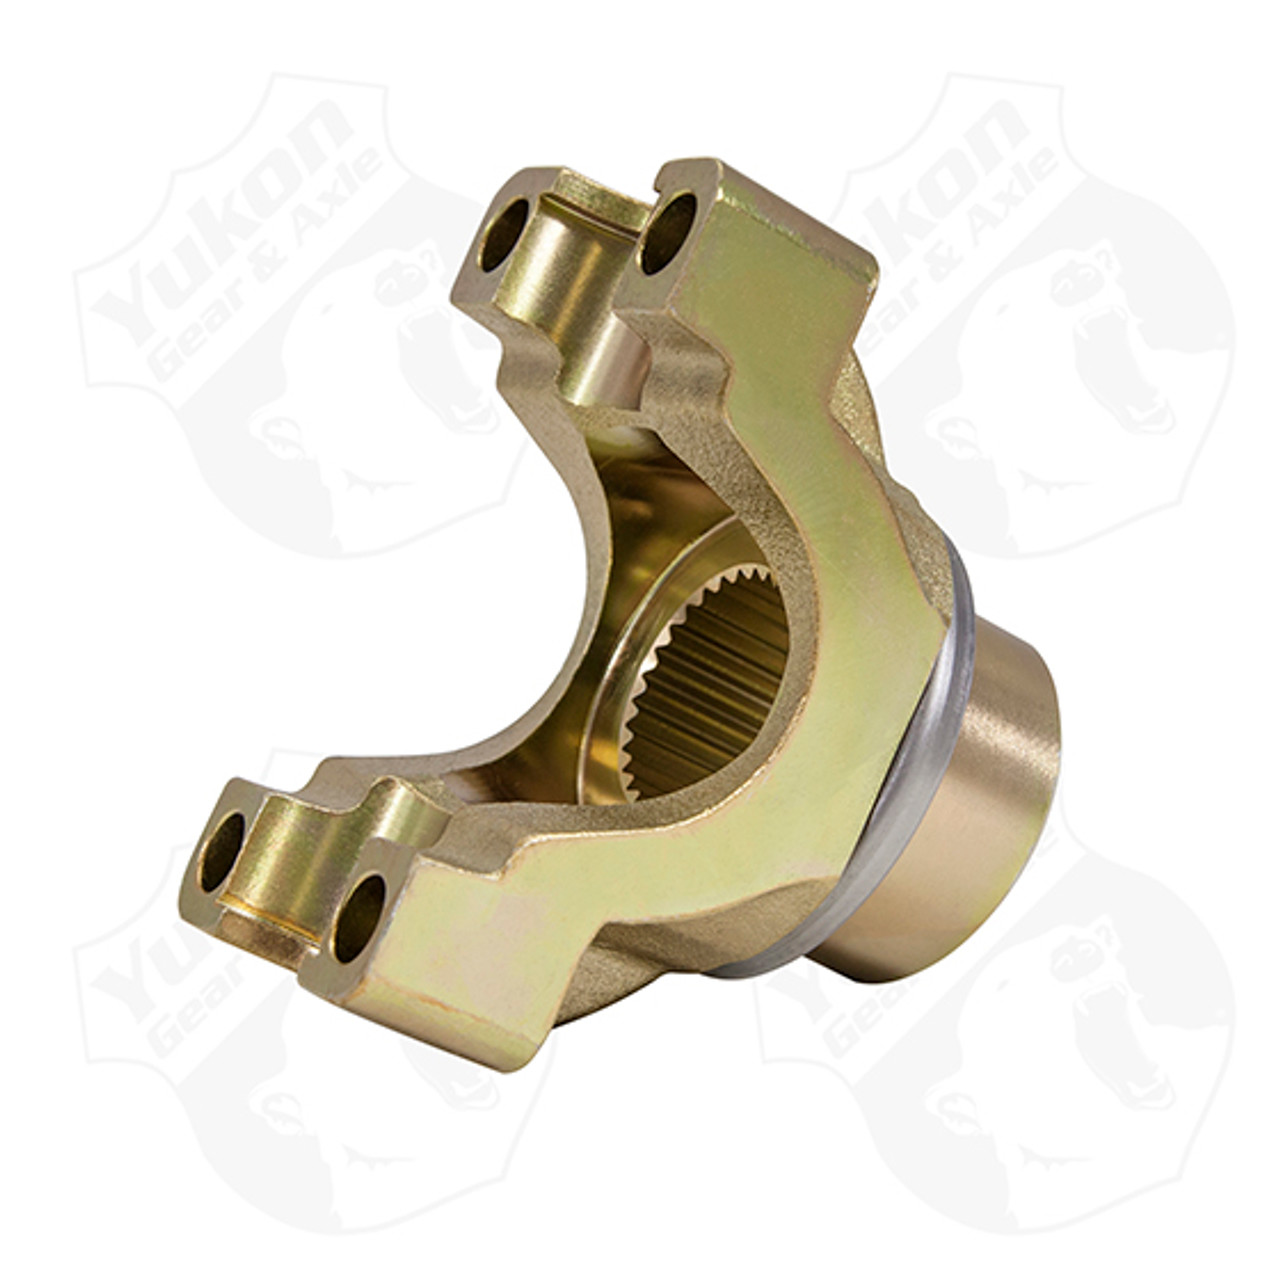 Yukon billet replacement yoke for Dana 60 and 70 with 29 spline pinion and a 1350 U/Joint size